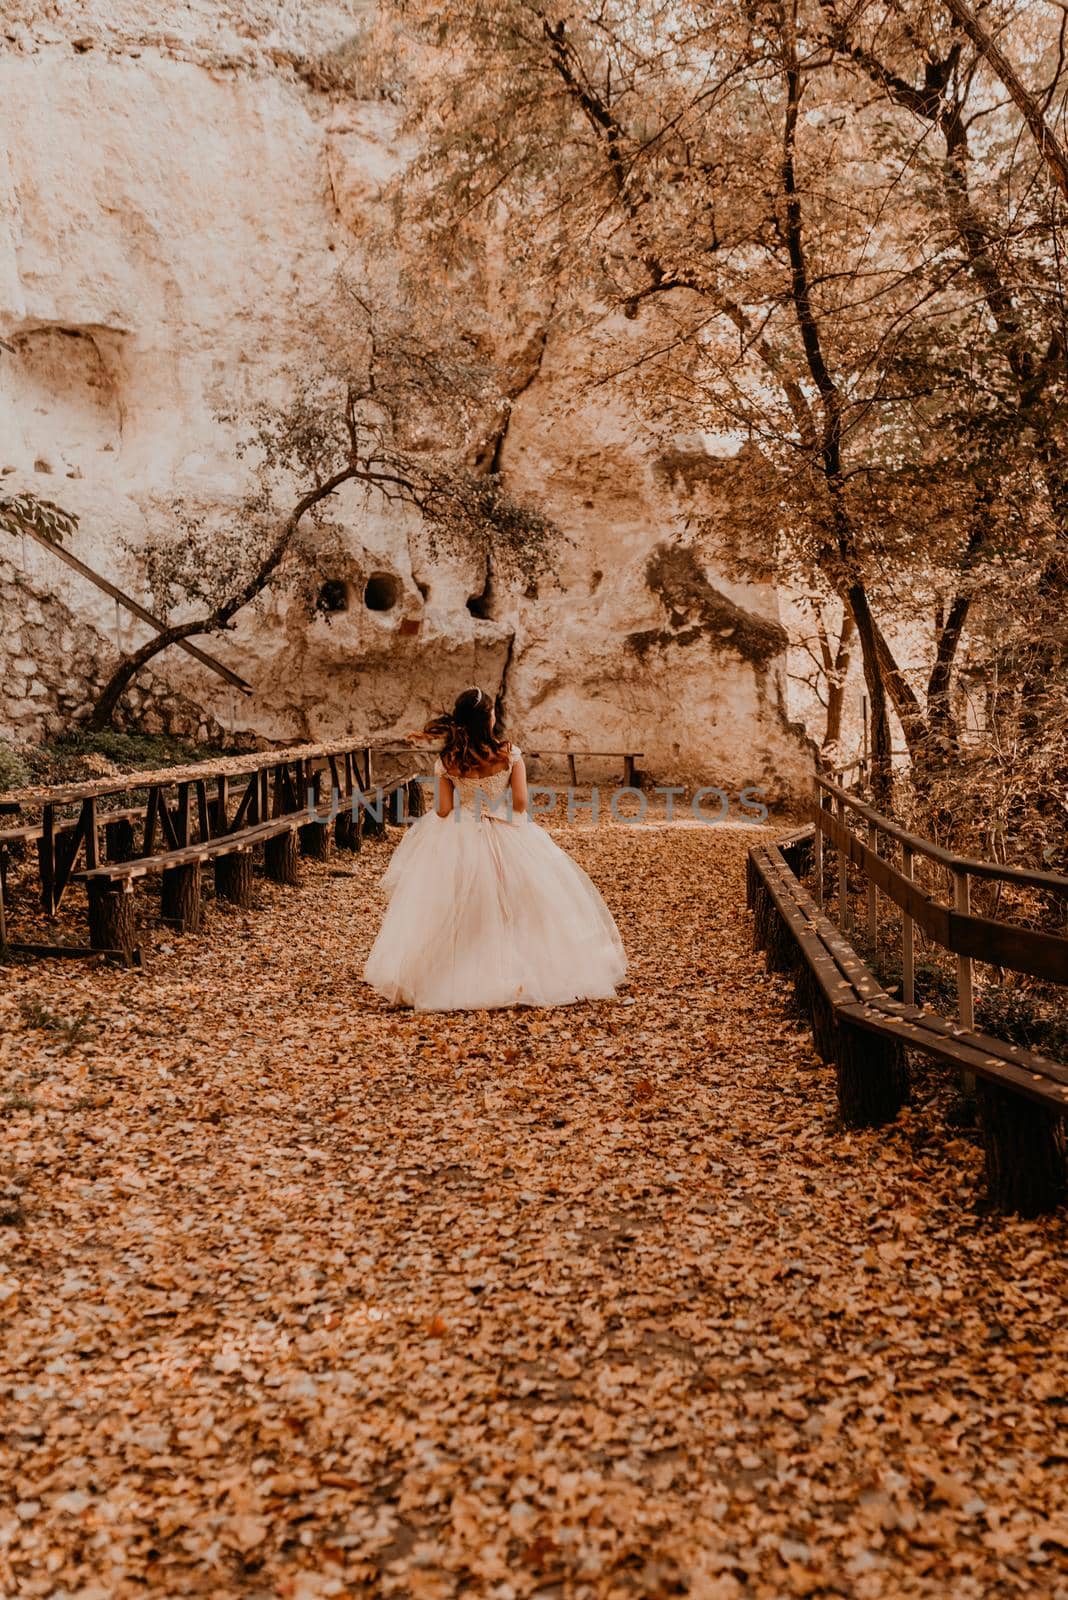 woman bride in white wedding dress with hairstyle makeup and crown on her head walks through autumn forest on fallen orange leaves